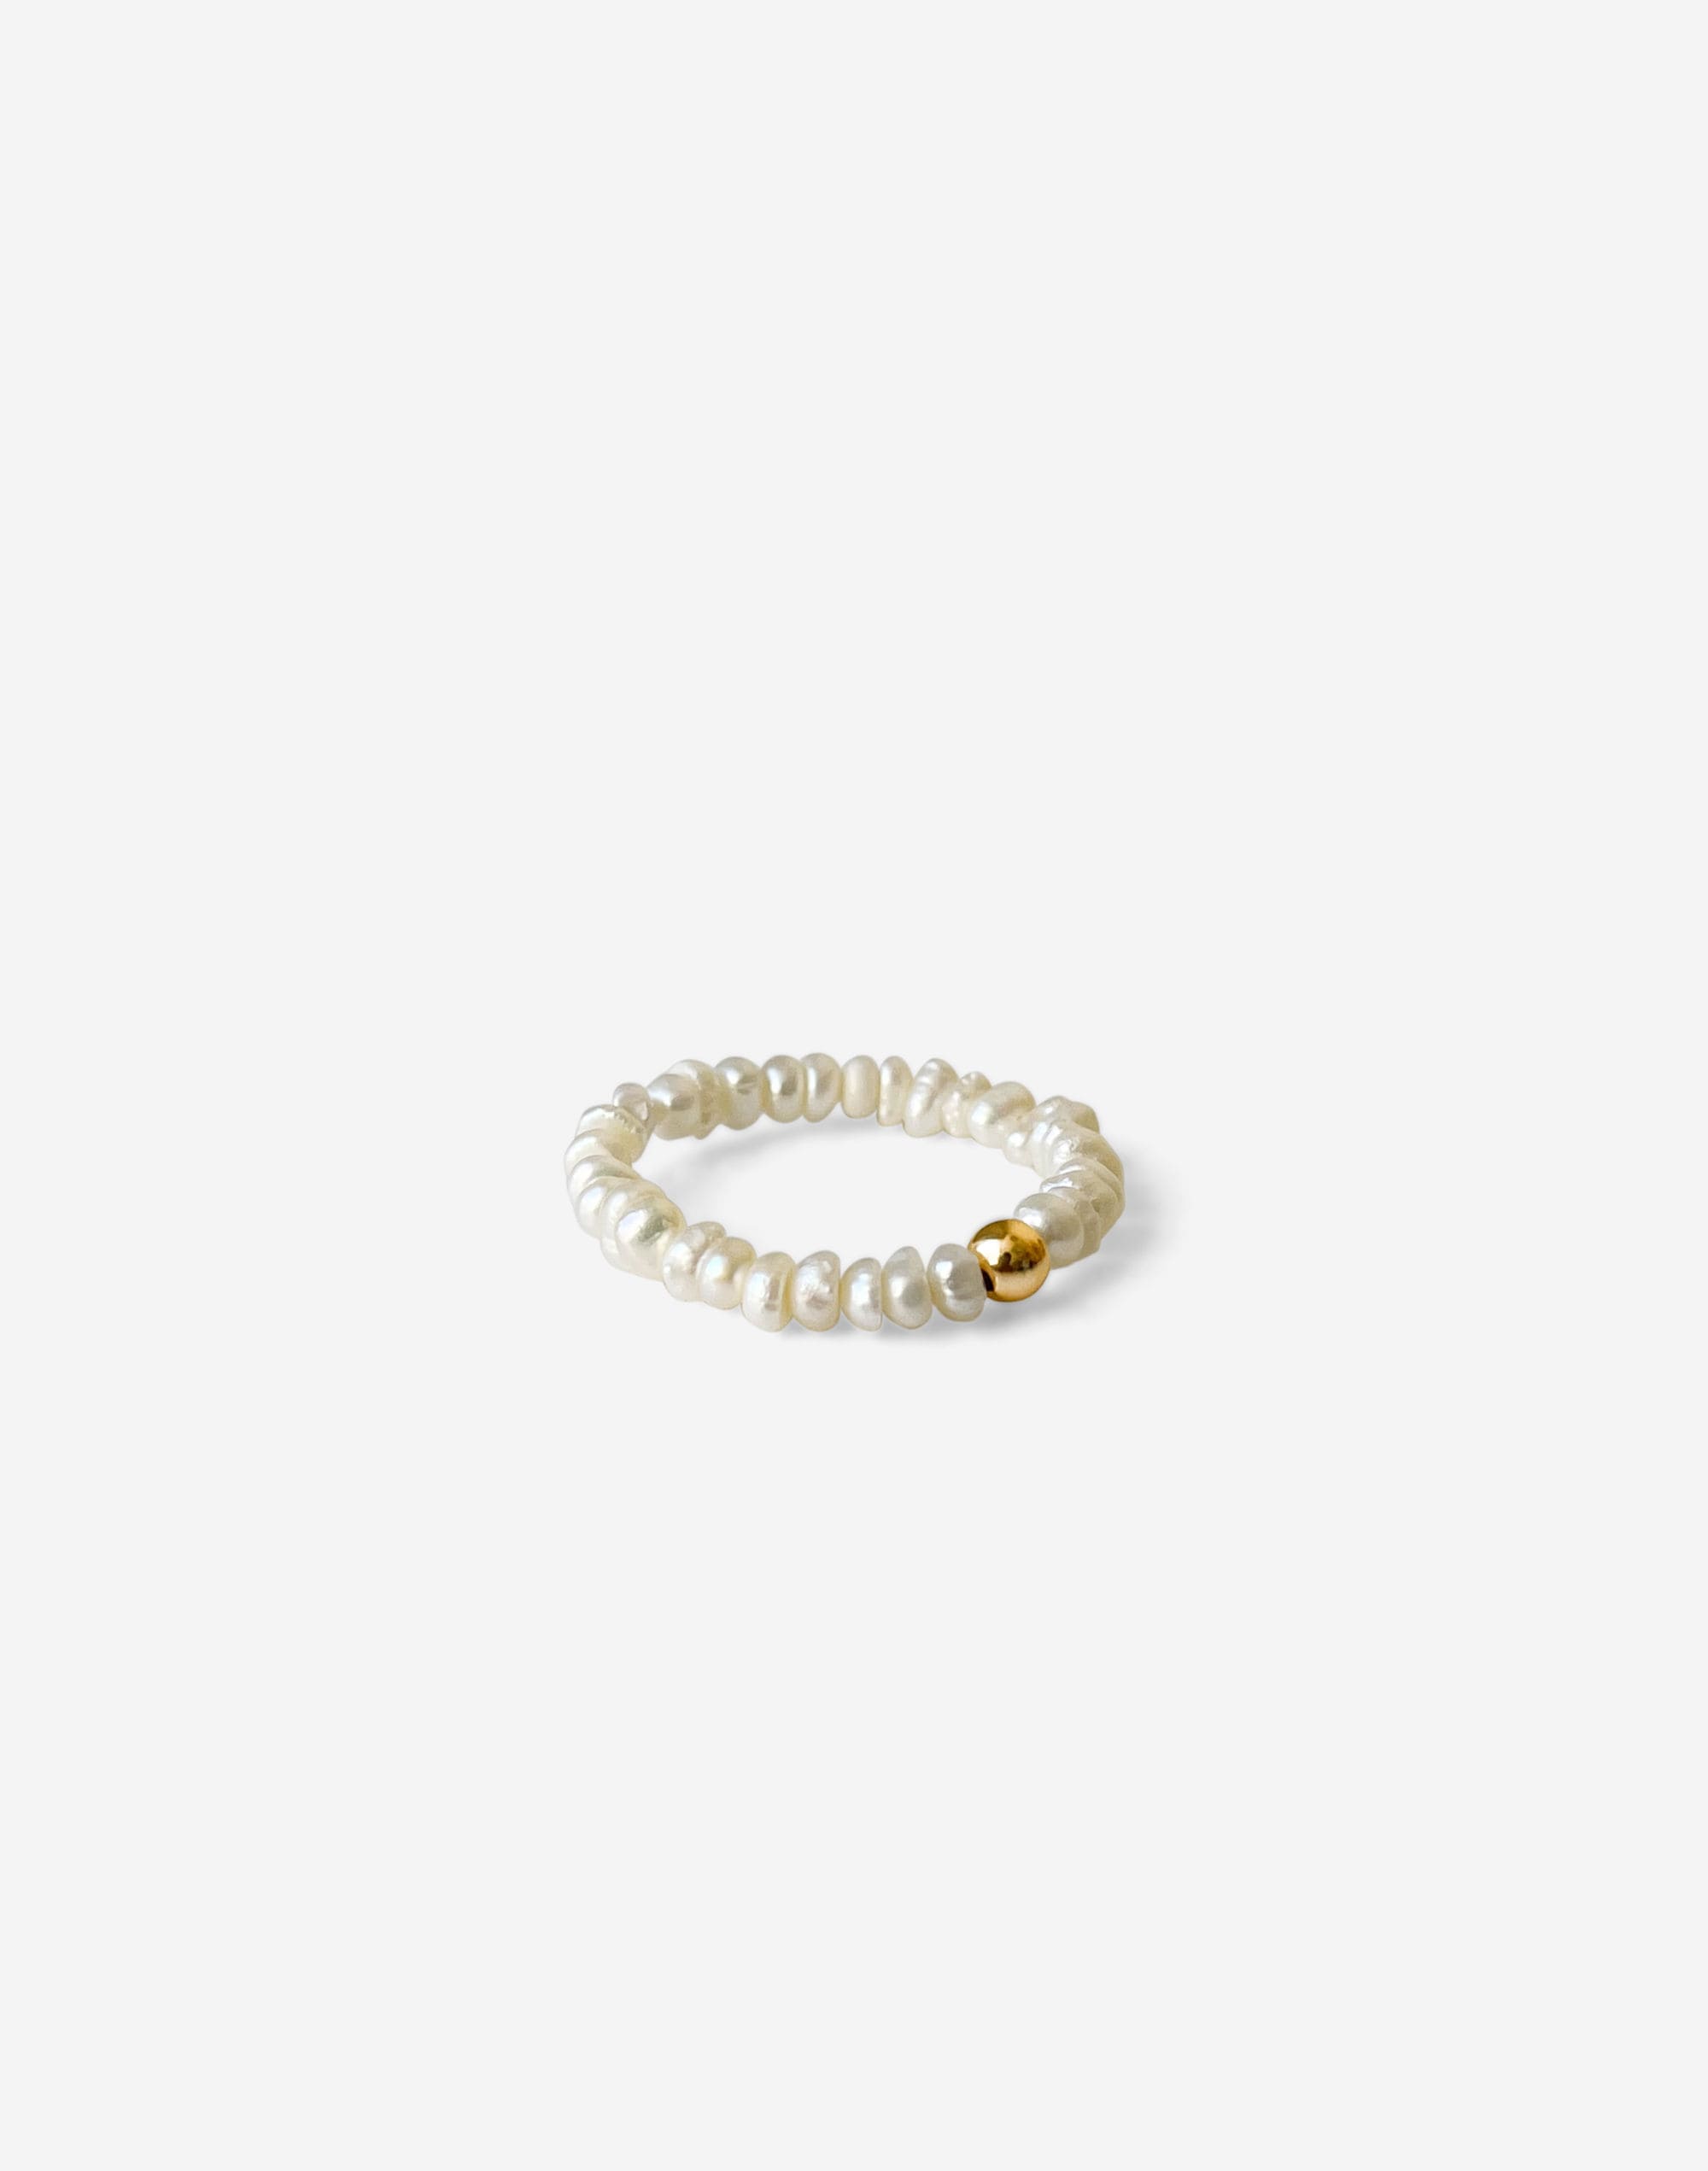 Madewell Pearl Beaded Ring in Freshwater Pearl - Size 6